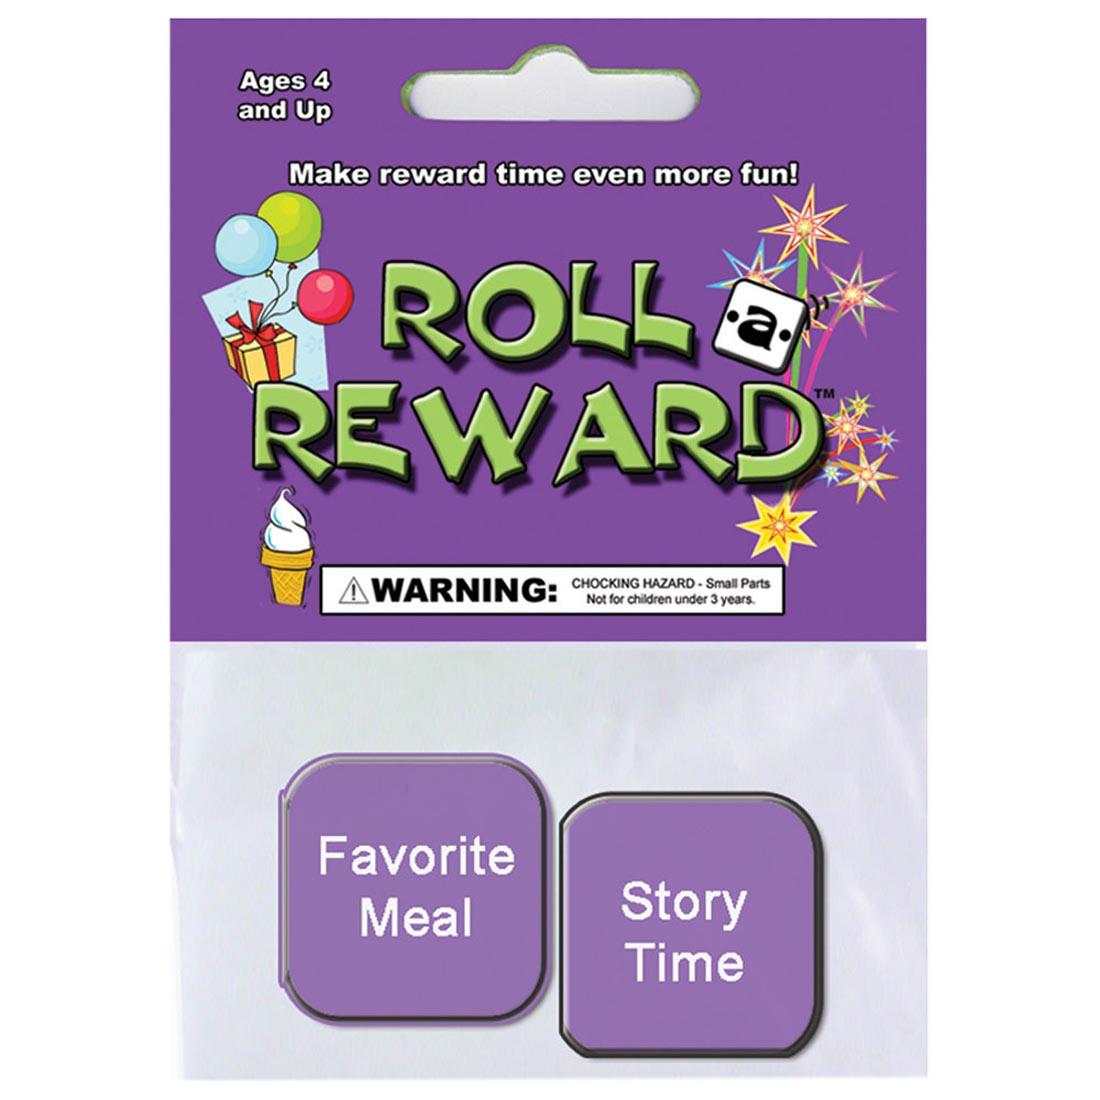 Roll A Reward Dice with sides like Favorite Meal and Story Time